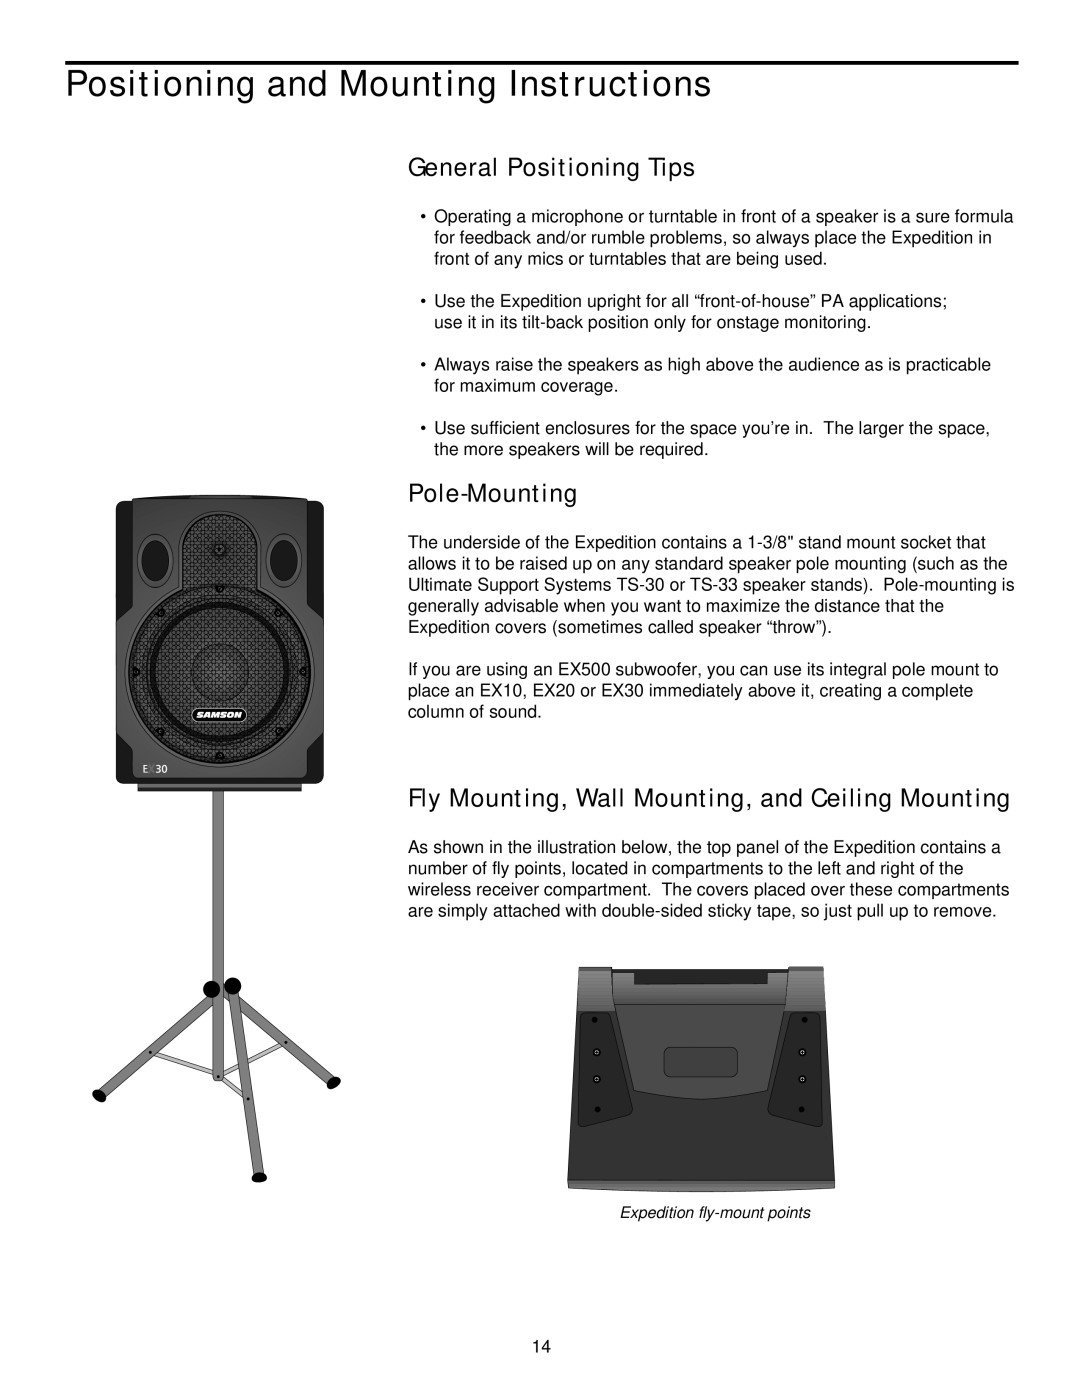 Samson EX10, EX20, EX30 owner manual Positioning and Mounting Instructions, General Positioning Tips, Pole-Mounting 